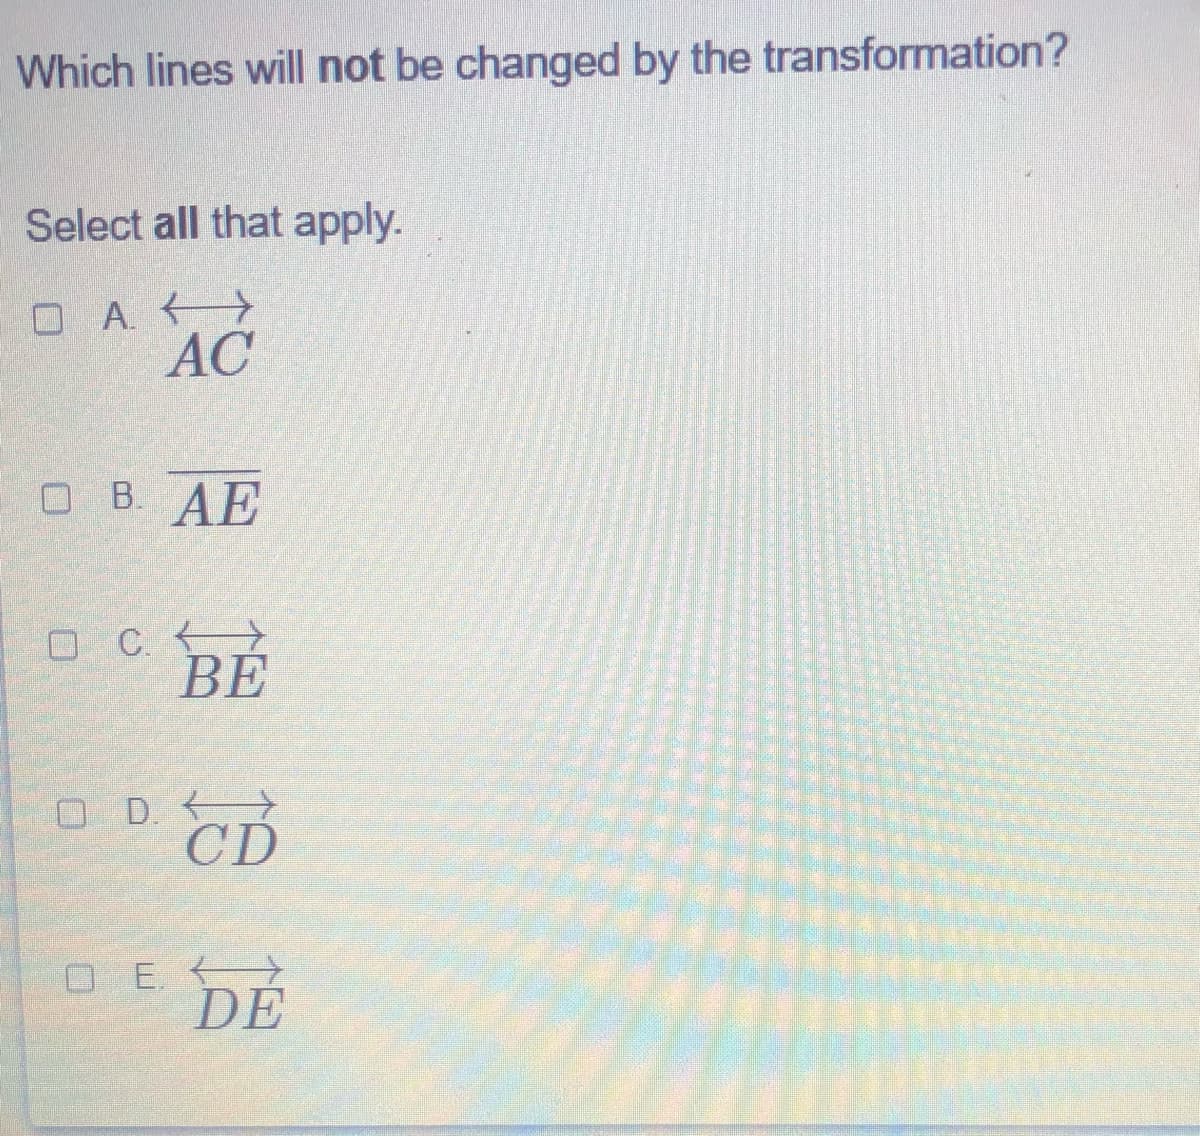 Which lines will not be changed by the transformation?
Select all that apply.
OA. >
AC
OB AE
O C. >
ВЕ
OD CD
O E.
DE
